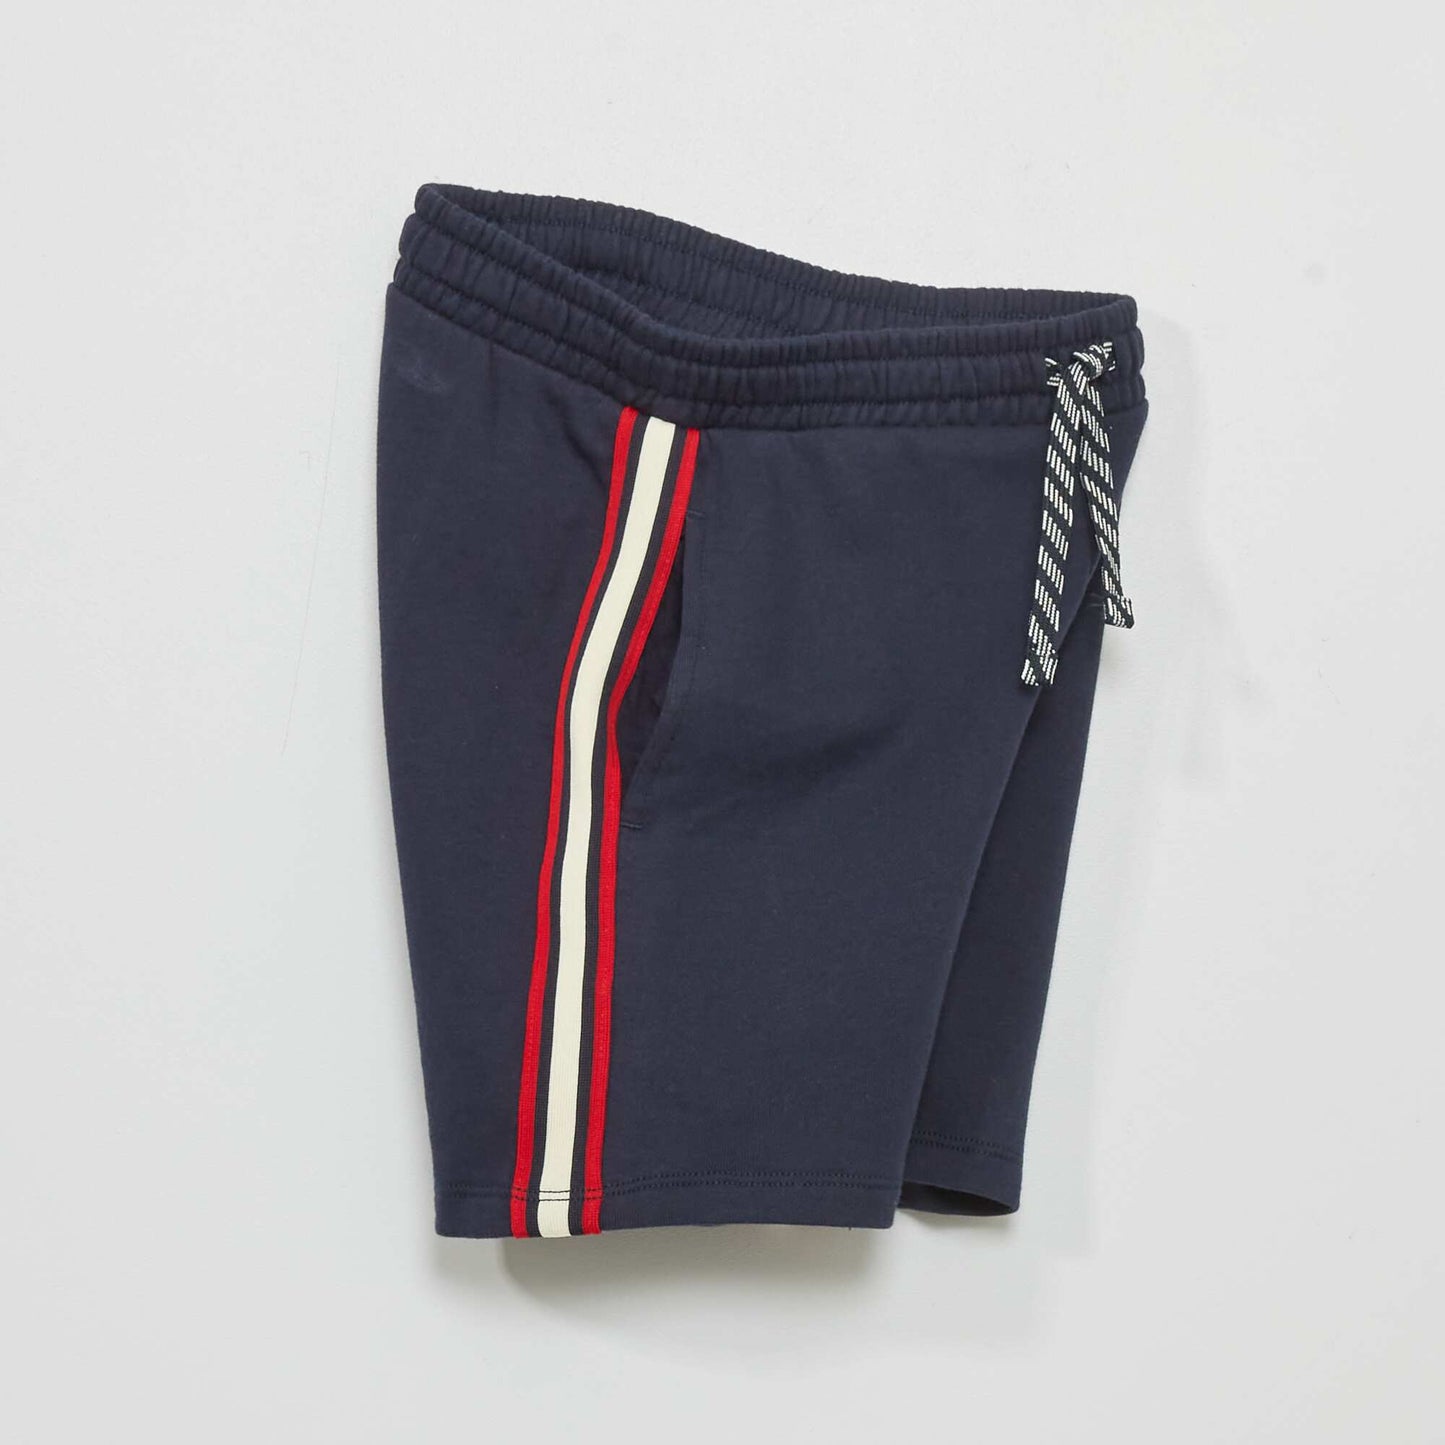 Sweatshirt fabric shorts with contrasting stripes blue